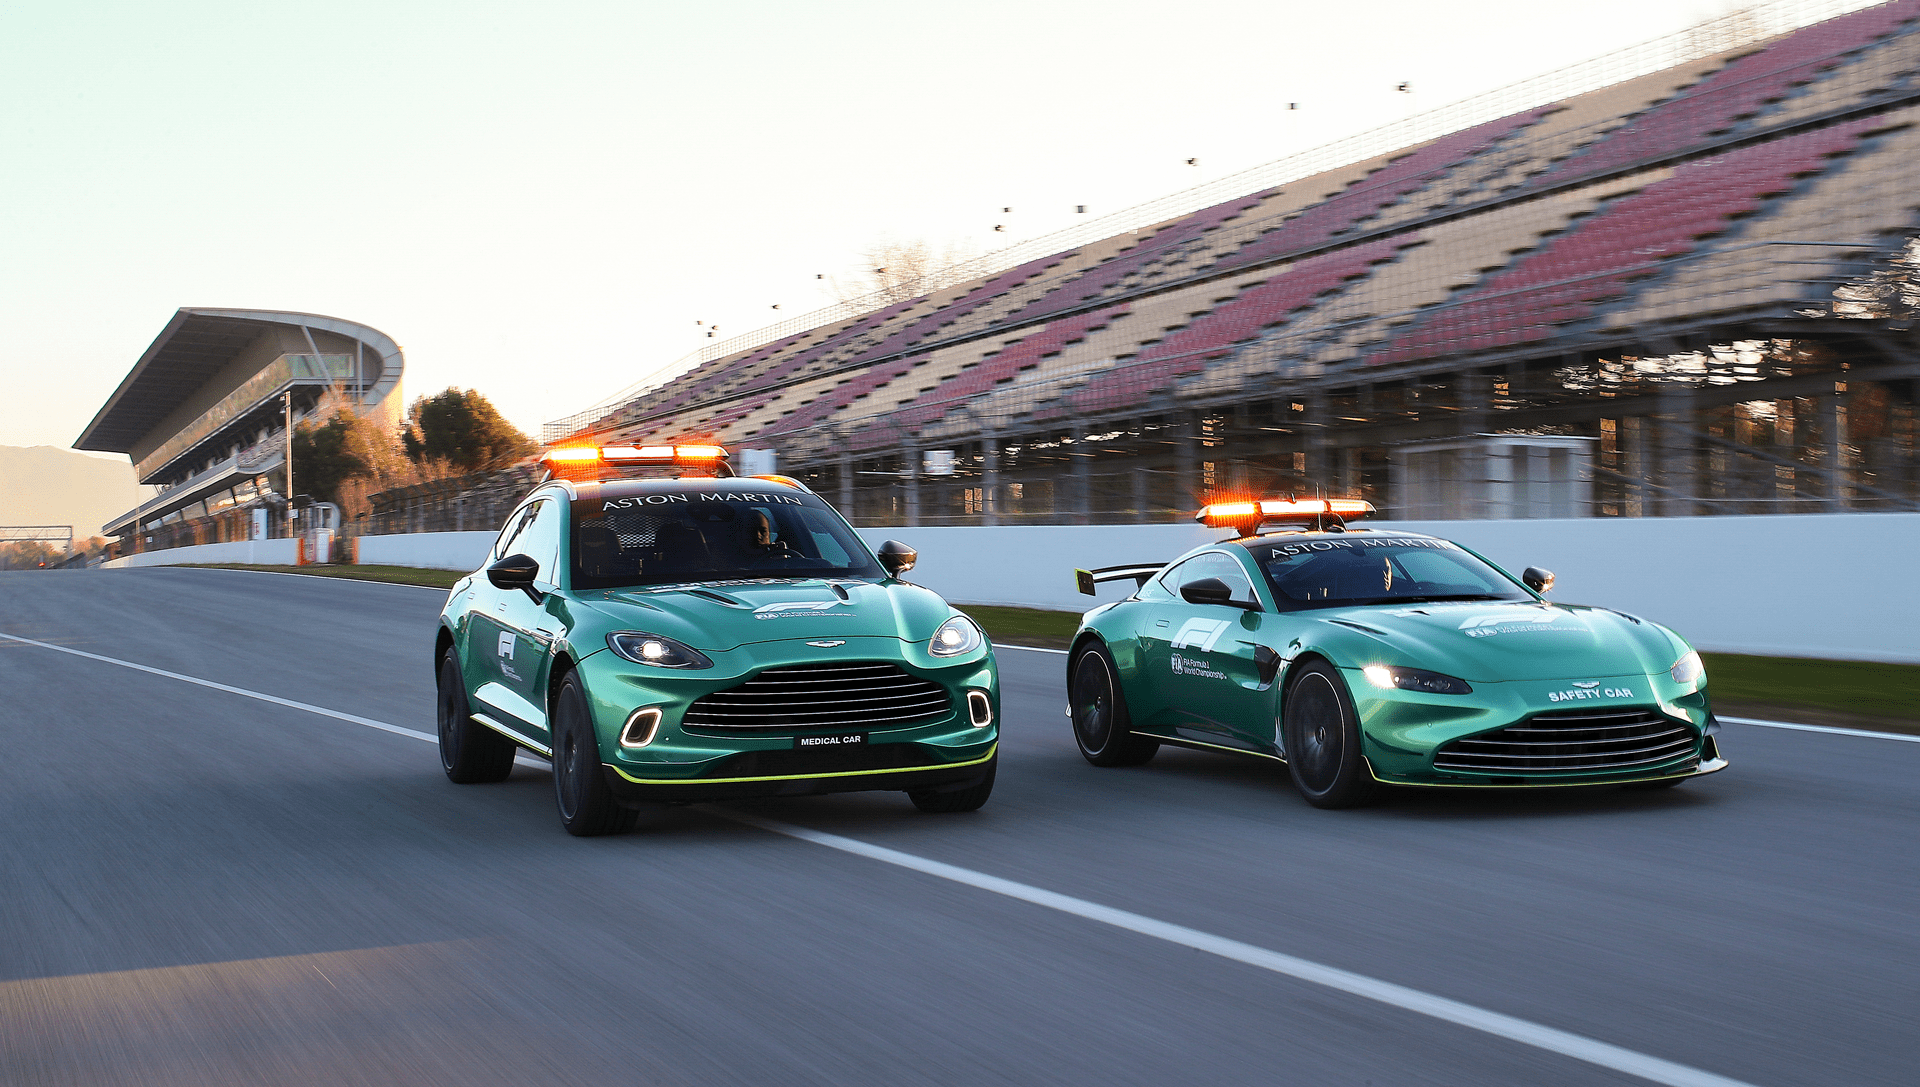 Aston Martin Vantage becomes official safety car of 2022 Formula One